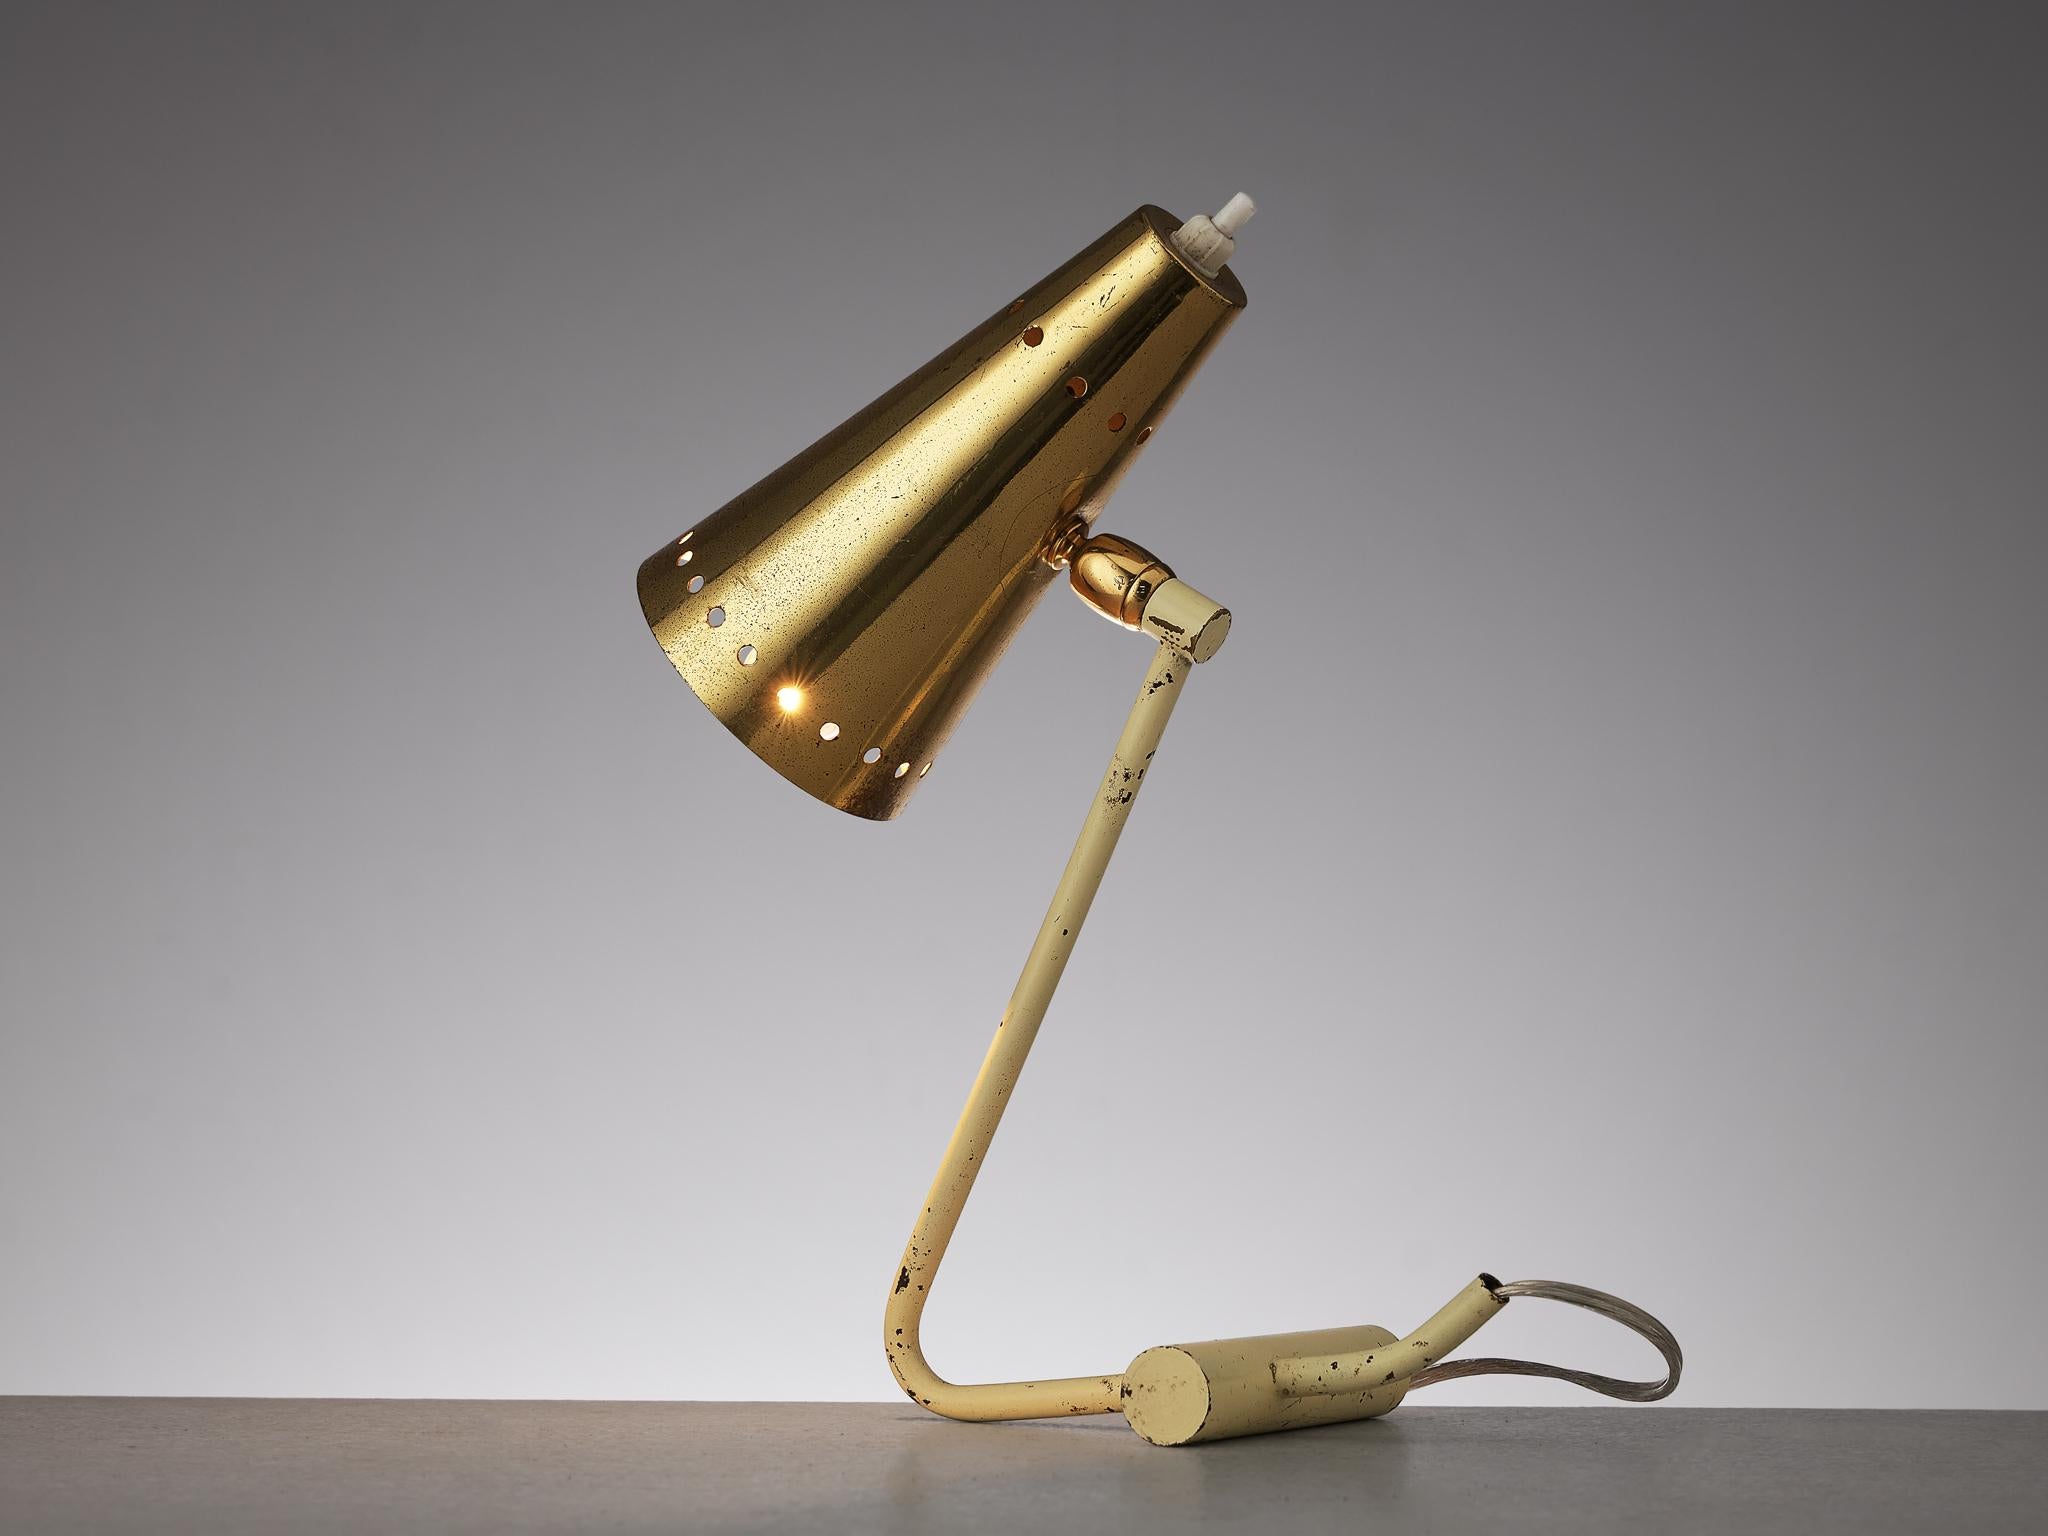 Table lamp, brass, metal, Italy, 1960s.

This table desk lamp is stunningly executed in brass and metal. It features typical Stilnovo shades with the recognizable holes in the rim of the shade that form a circle. The base of this small, playful